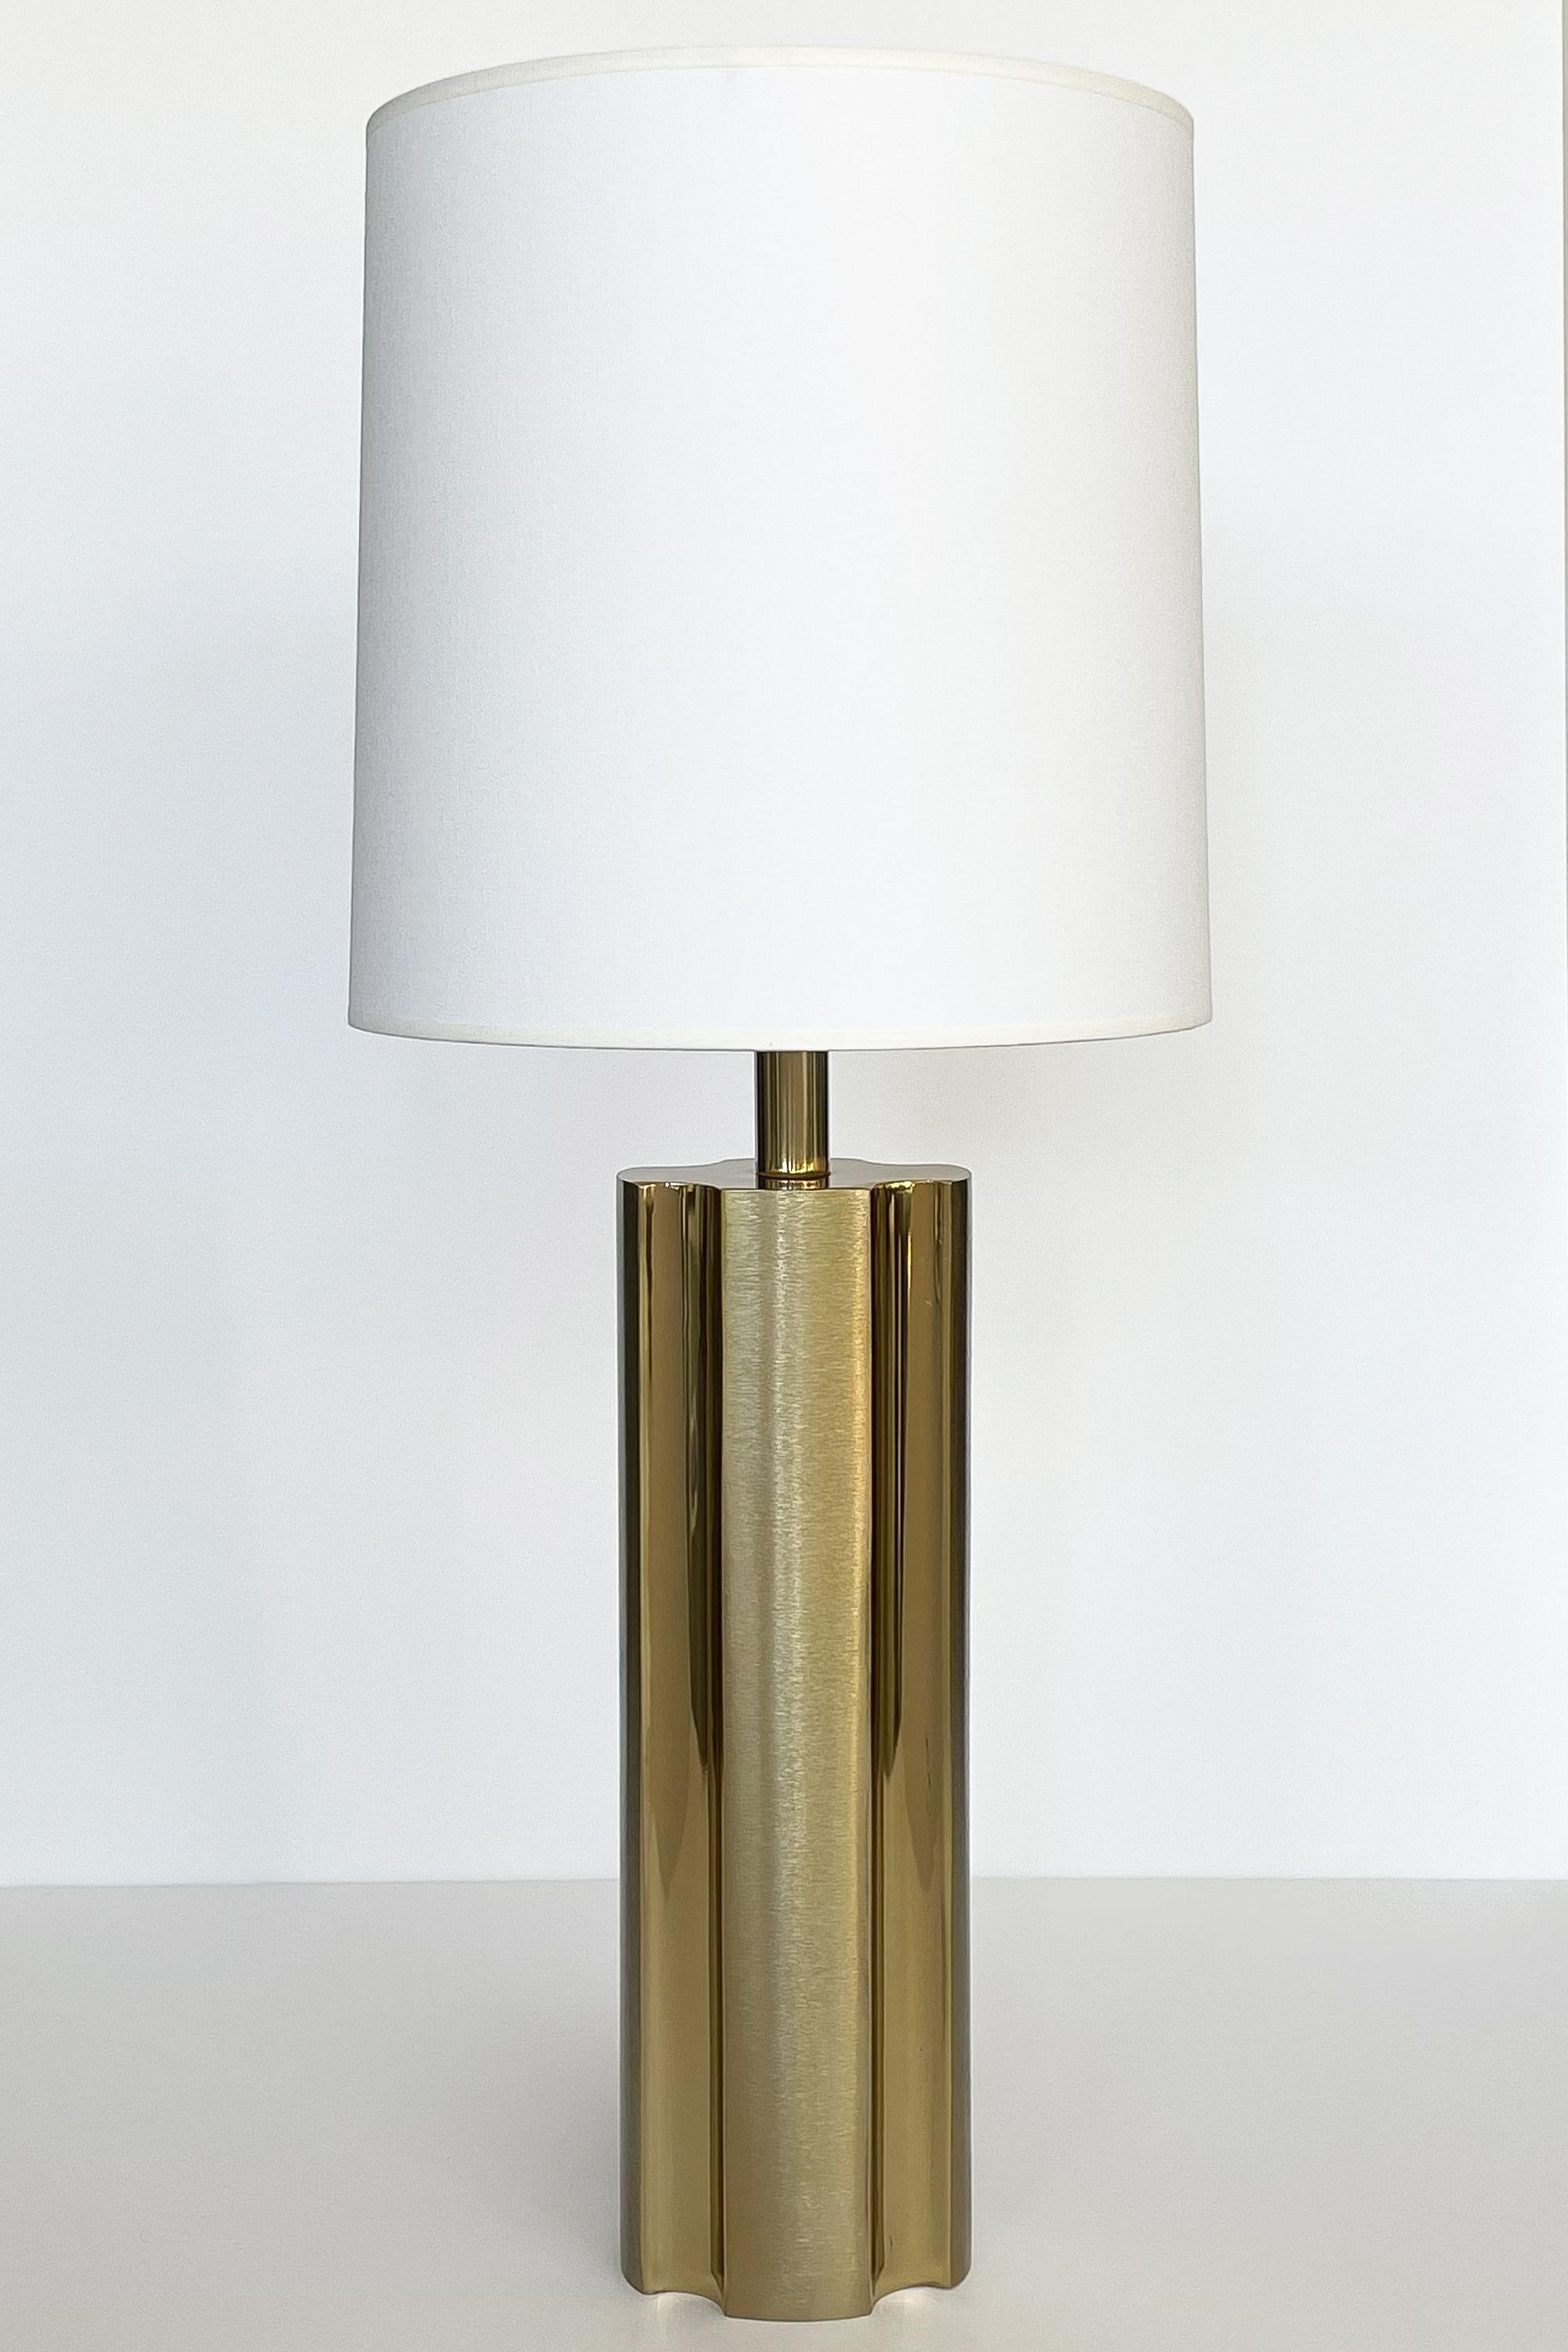 A Modernist brushed and polished brass table lamp by Laurel Lamp Company, circa 1970s. A sculptural monolithic form with brushed face and polished fluted design. Rewired. Takes one standard base light bulb. Brass cylinder finial. Adjustable harp.